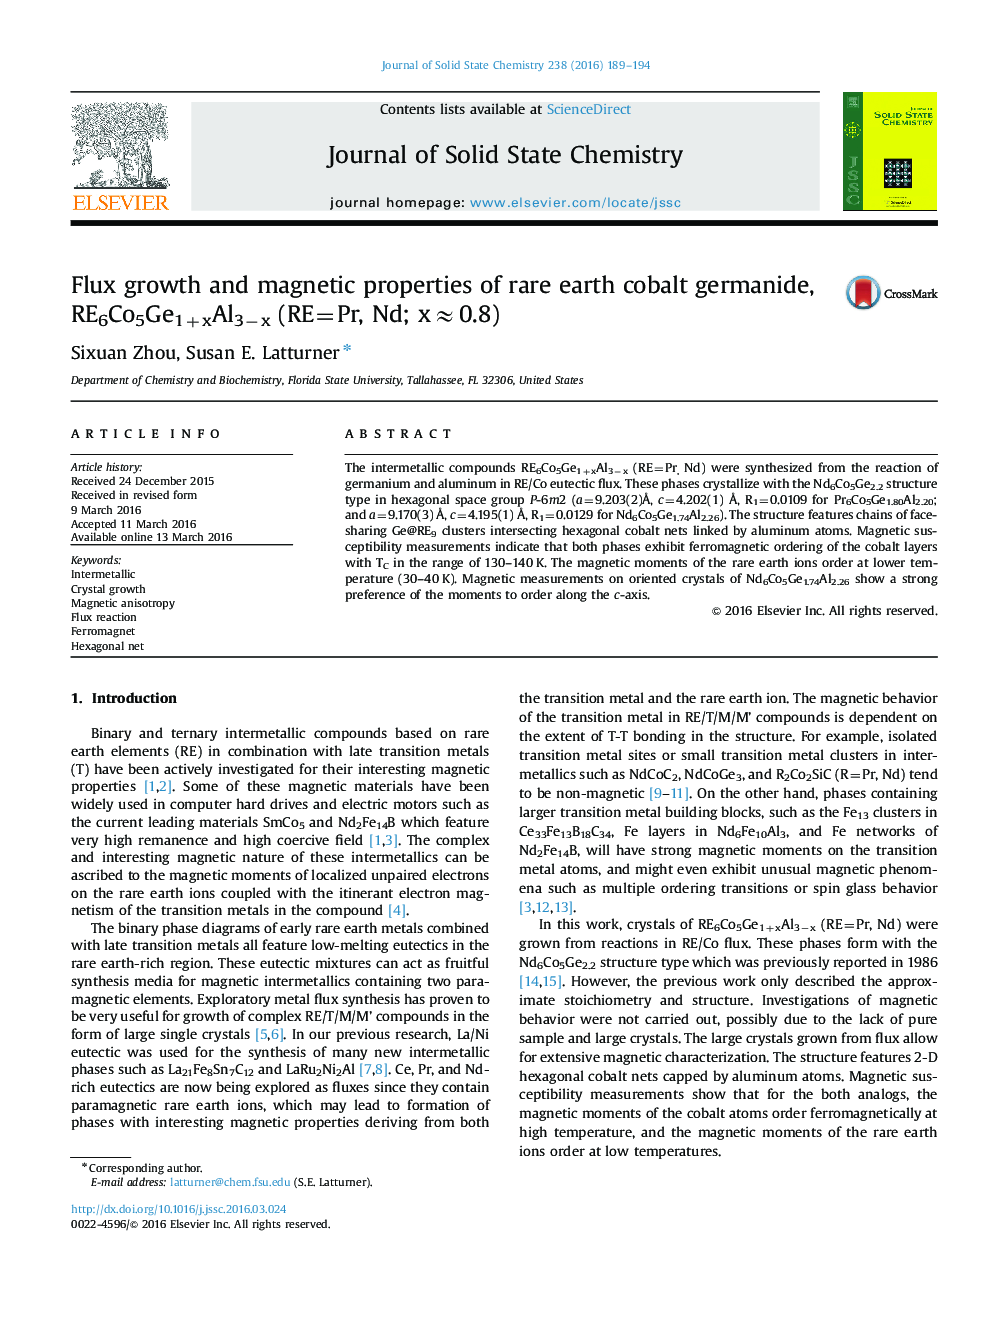 Flux growth and magnetic properties of rare earth cobalt germanide, RE6Co5Ge1+xAl3−x (RE=Pr, Nd; x≈0.8)